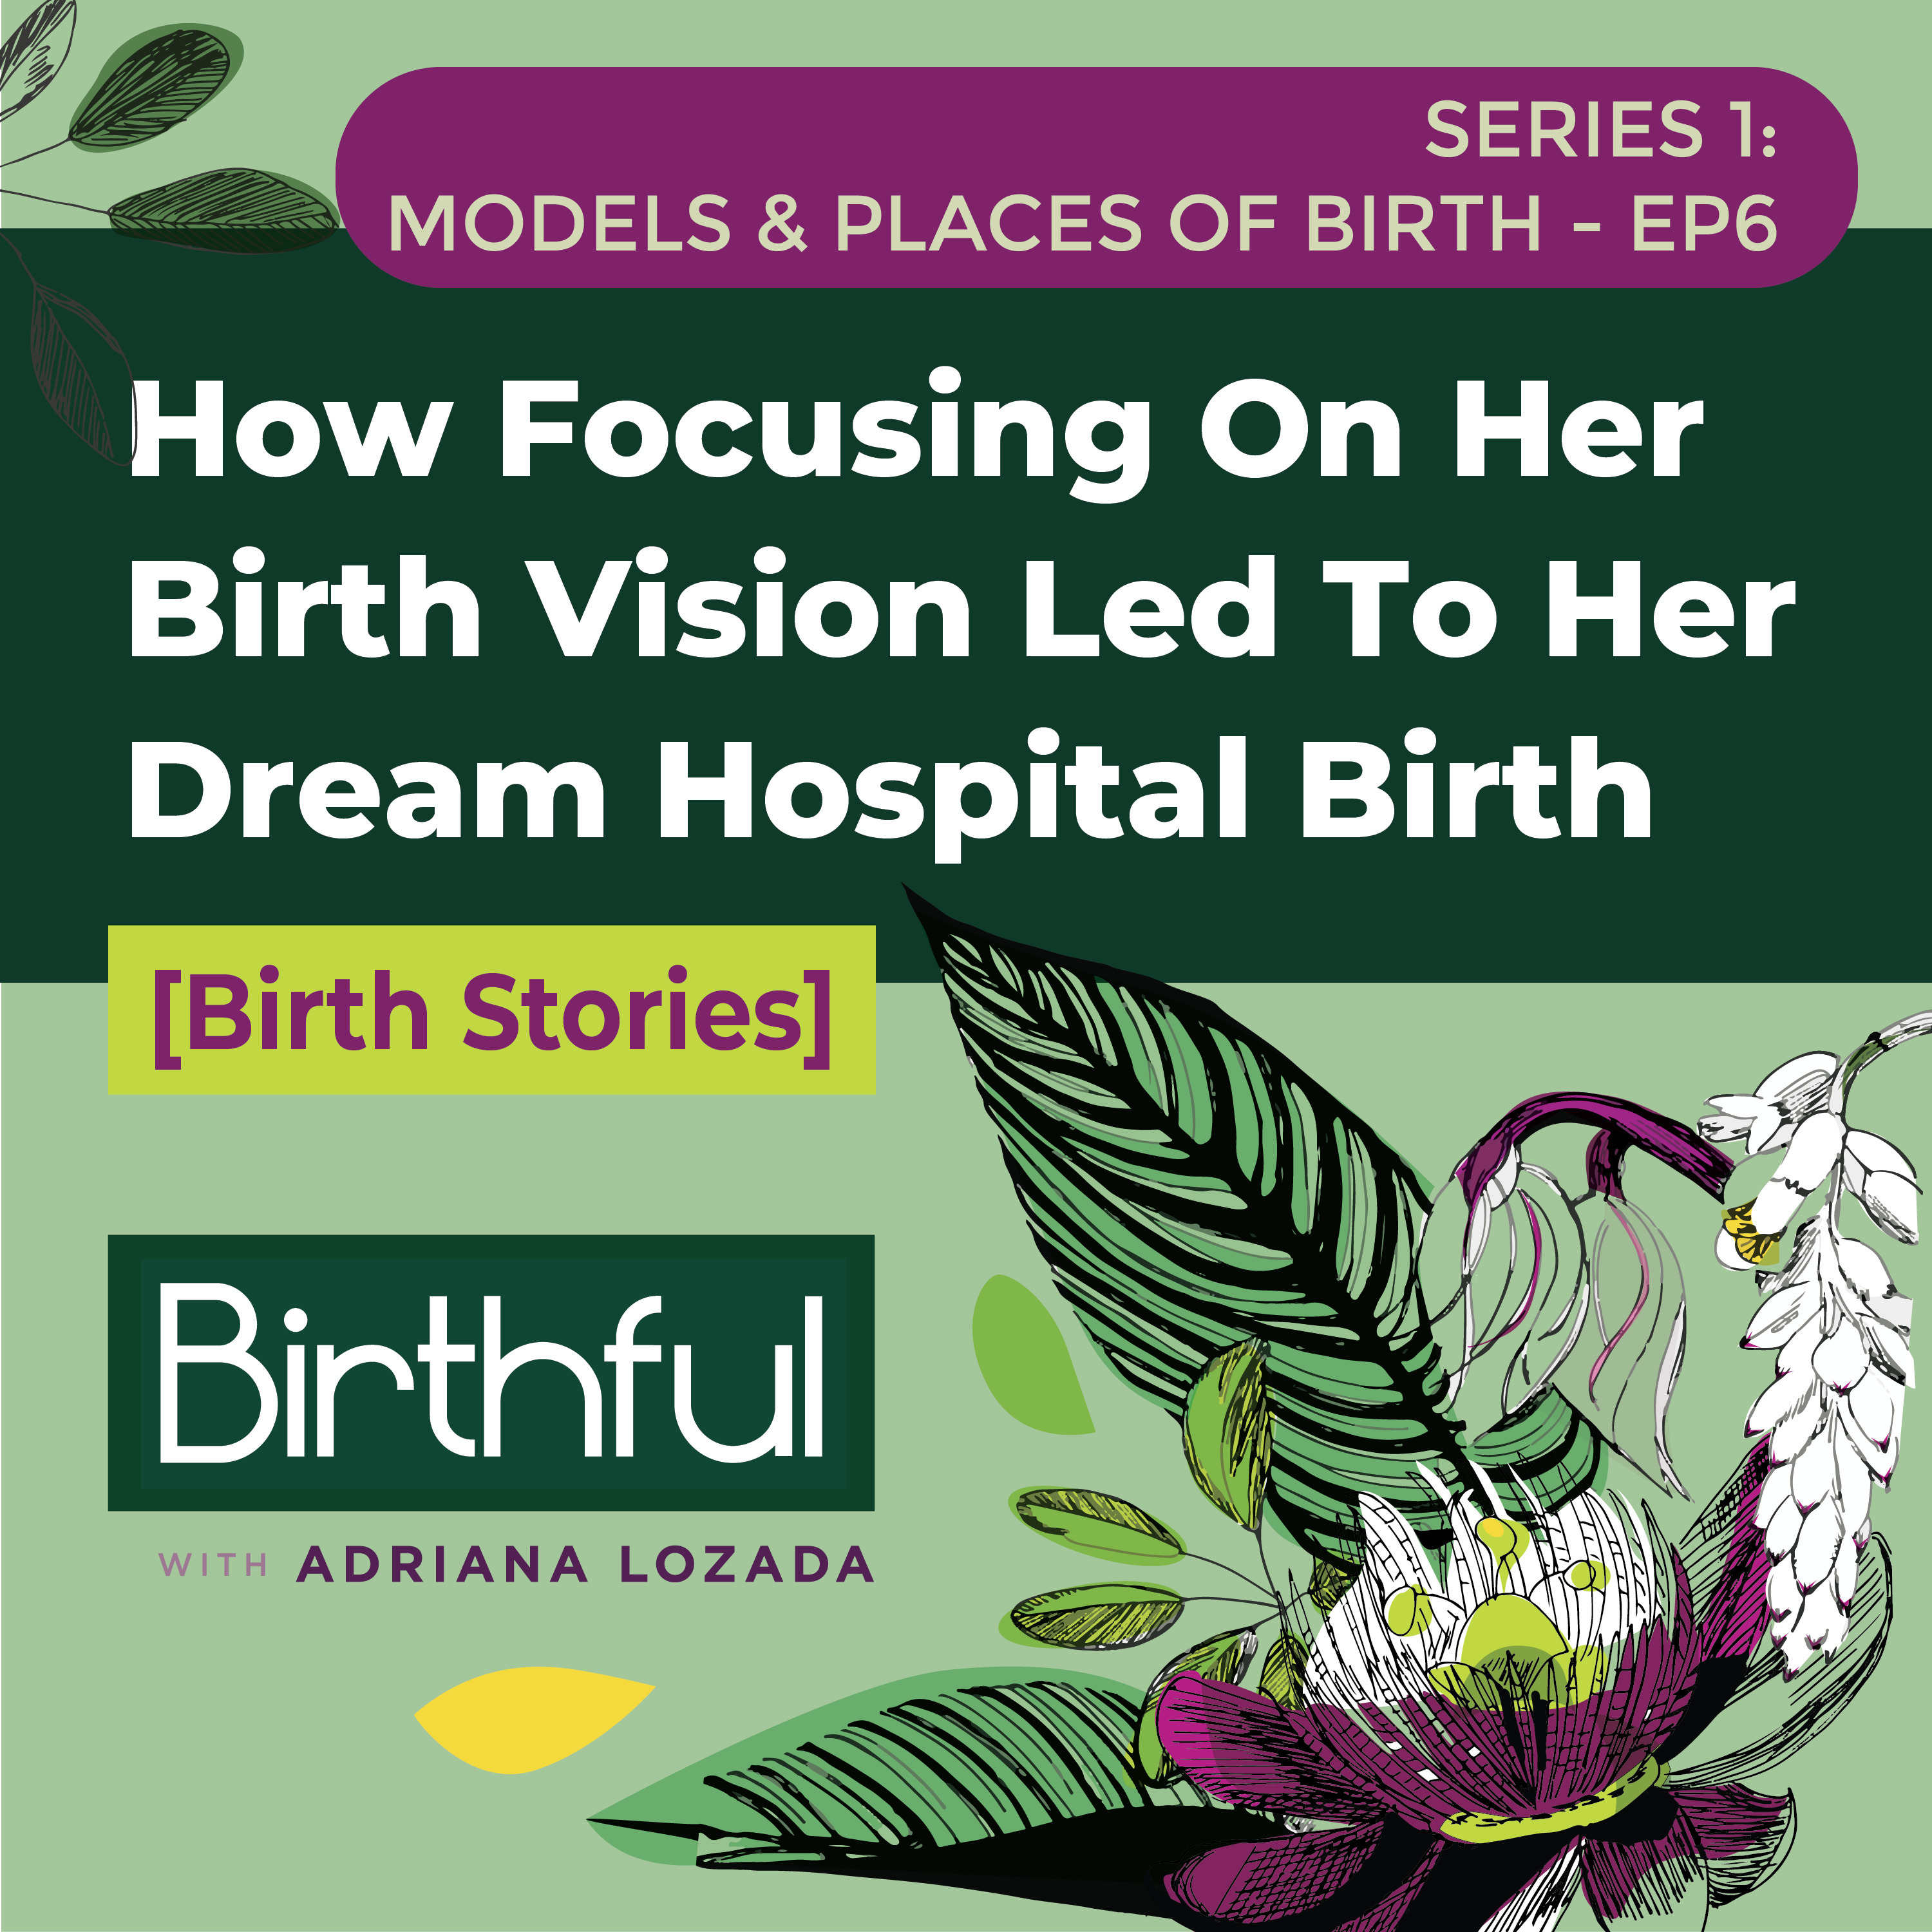 [Birth Stories] How Focusing On Her Birth Vision Led To Her Dream Hospital Birth